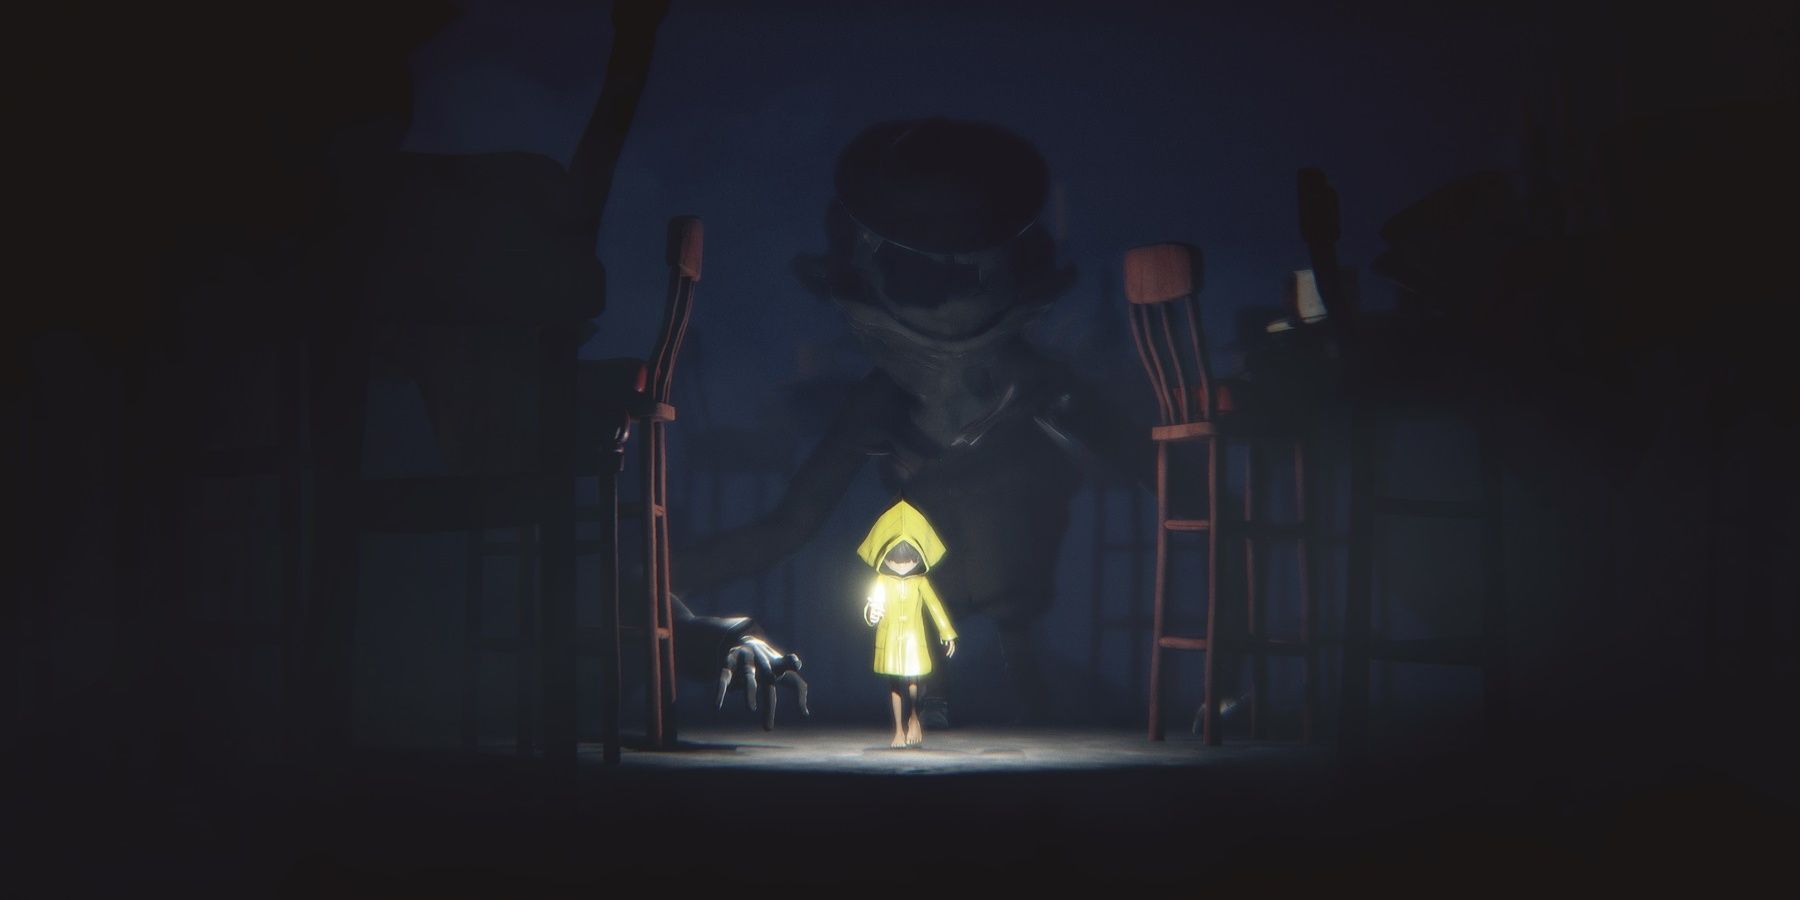 six from Little Nightmares